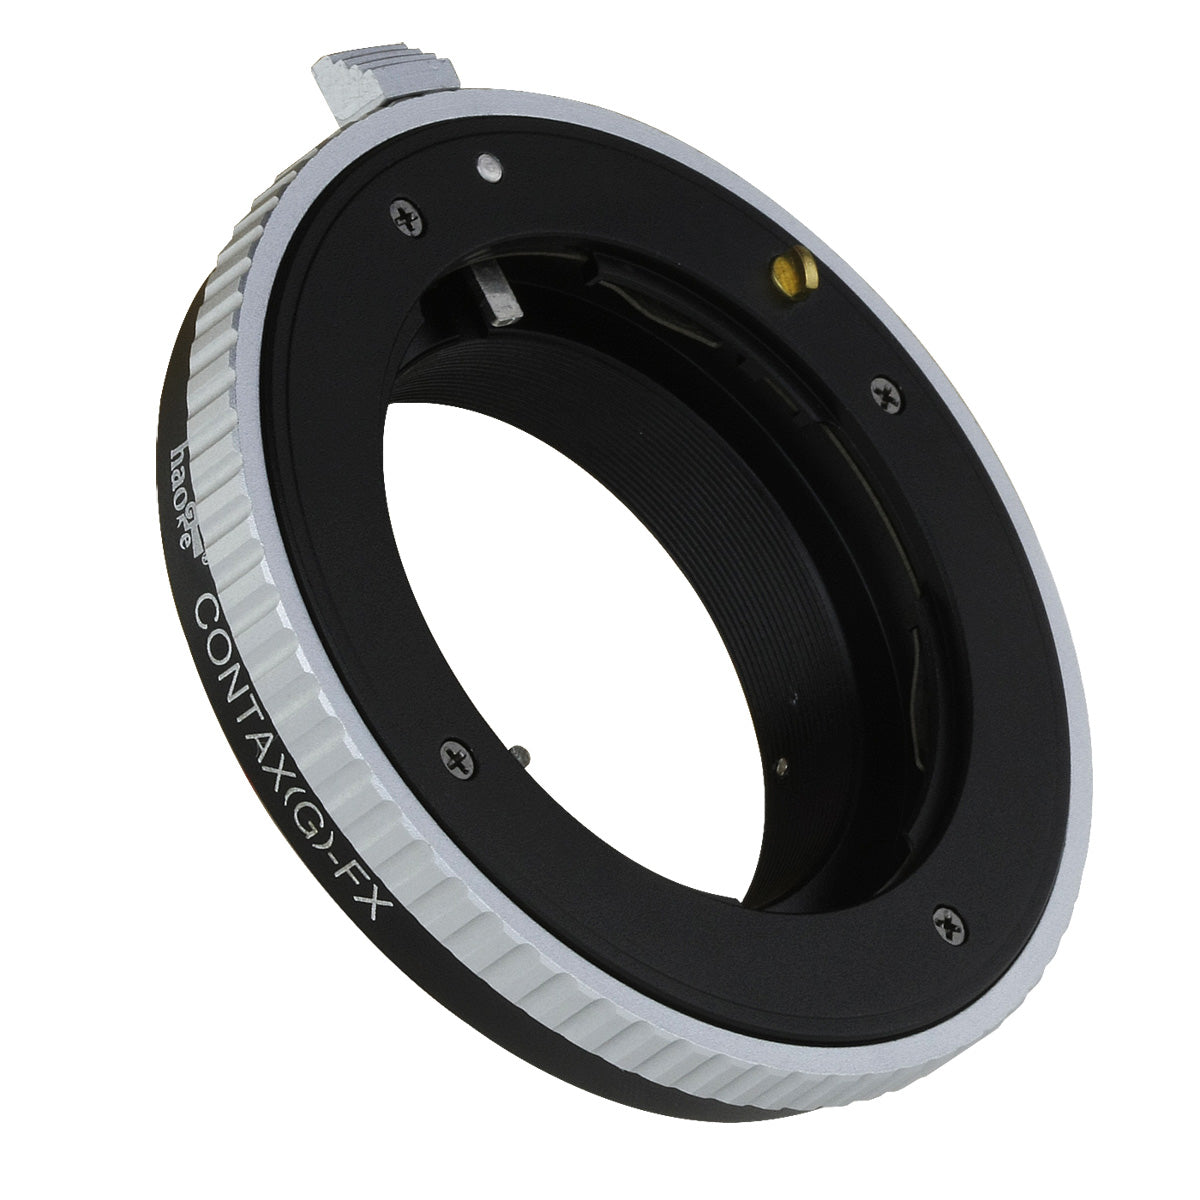 Haoge Lens Mount Adapter for Contax G Lens to Fujifilm X-mount Camera such as X-A1, X-A2, X-A3, X-A10, X-E1, X-E2, X-E2s, X-M1, X-Pro1, X-Pro2, X-T1, X-T2, X-T10, X-T20